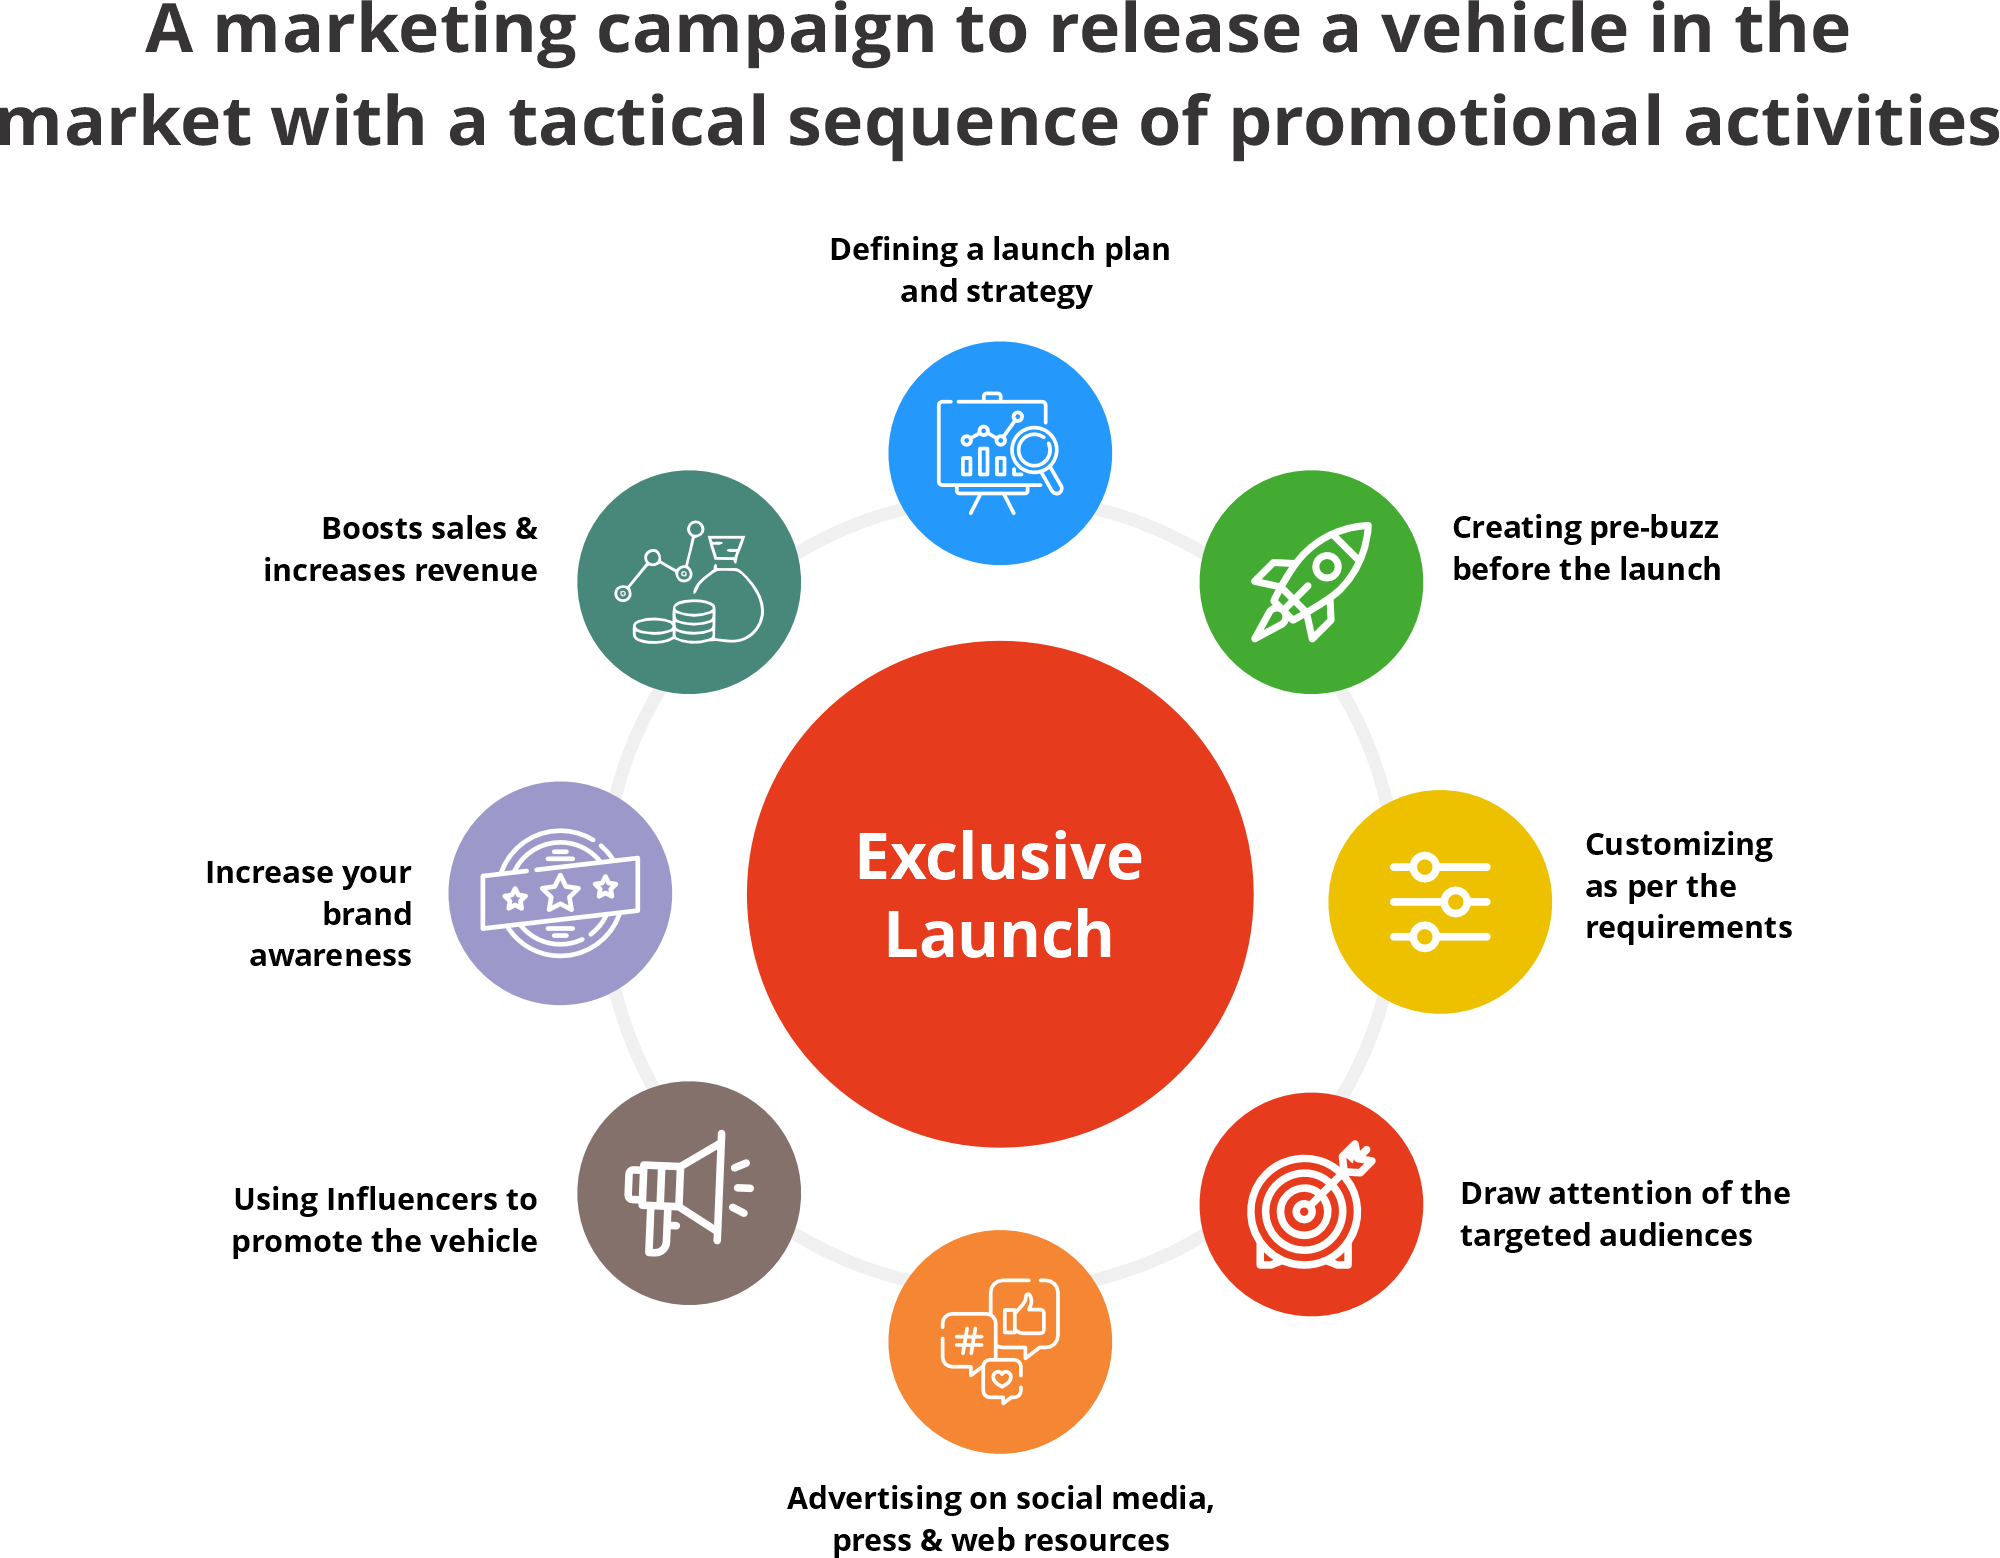 Exclusive Launch